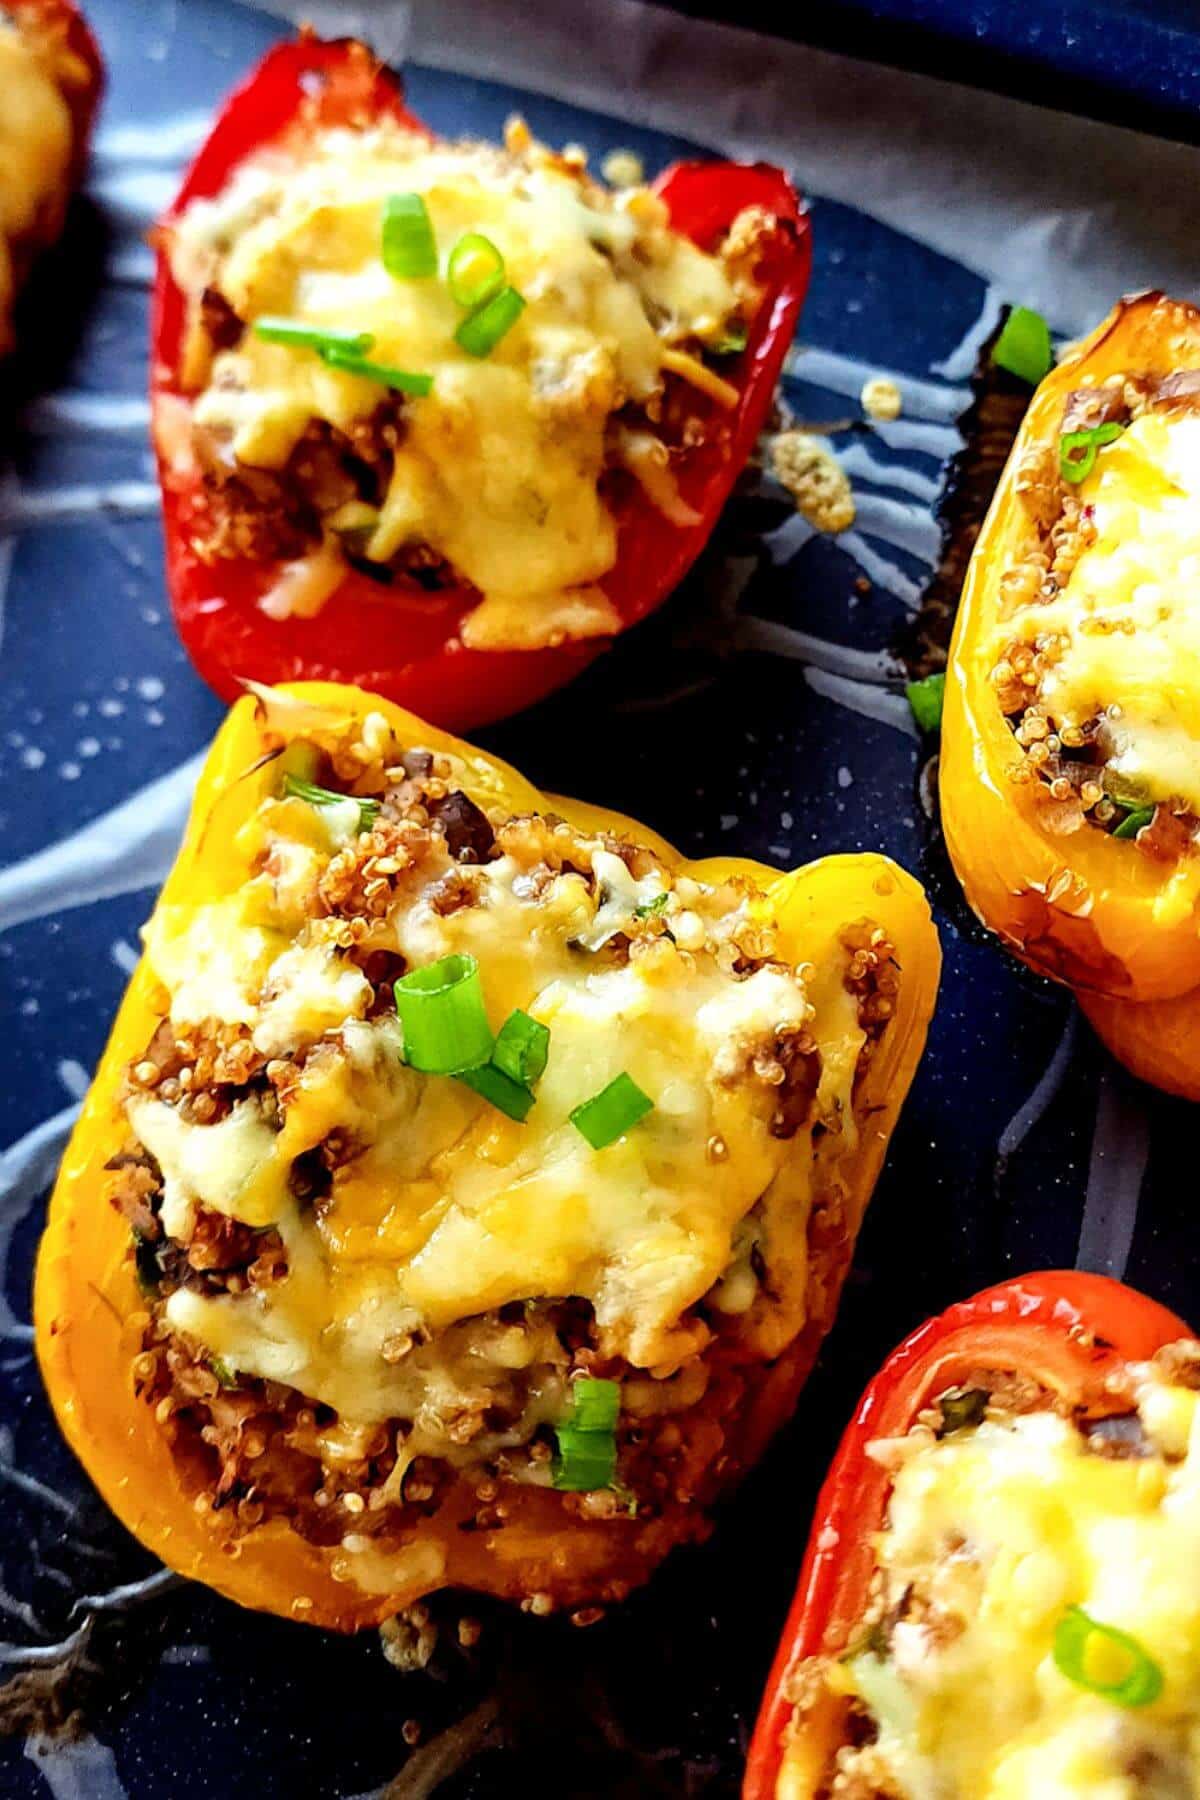 Baked quinoa mushroom bell peppers garnished with chopped spring onion.